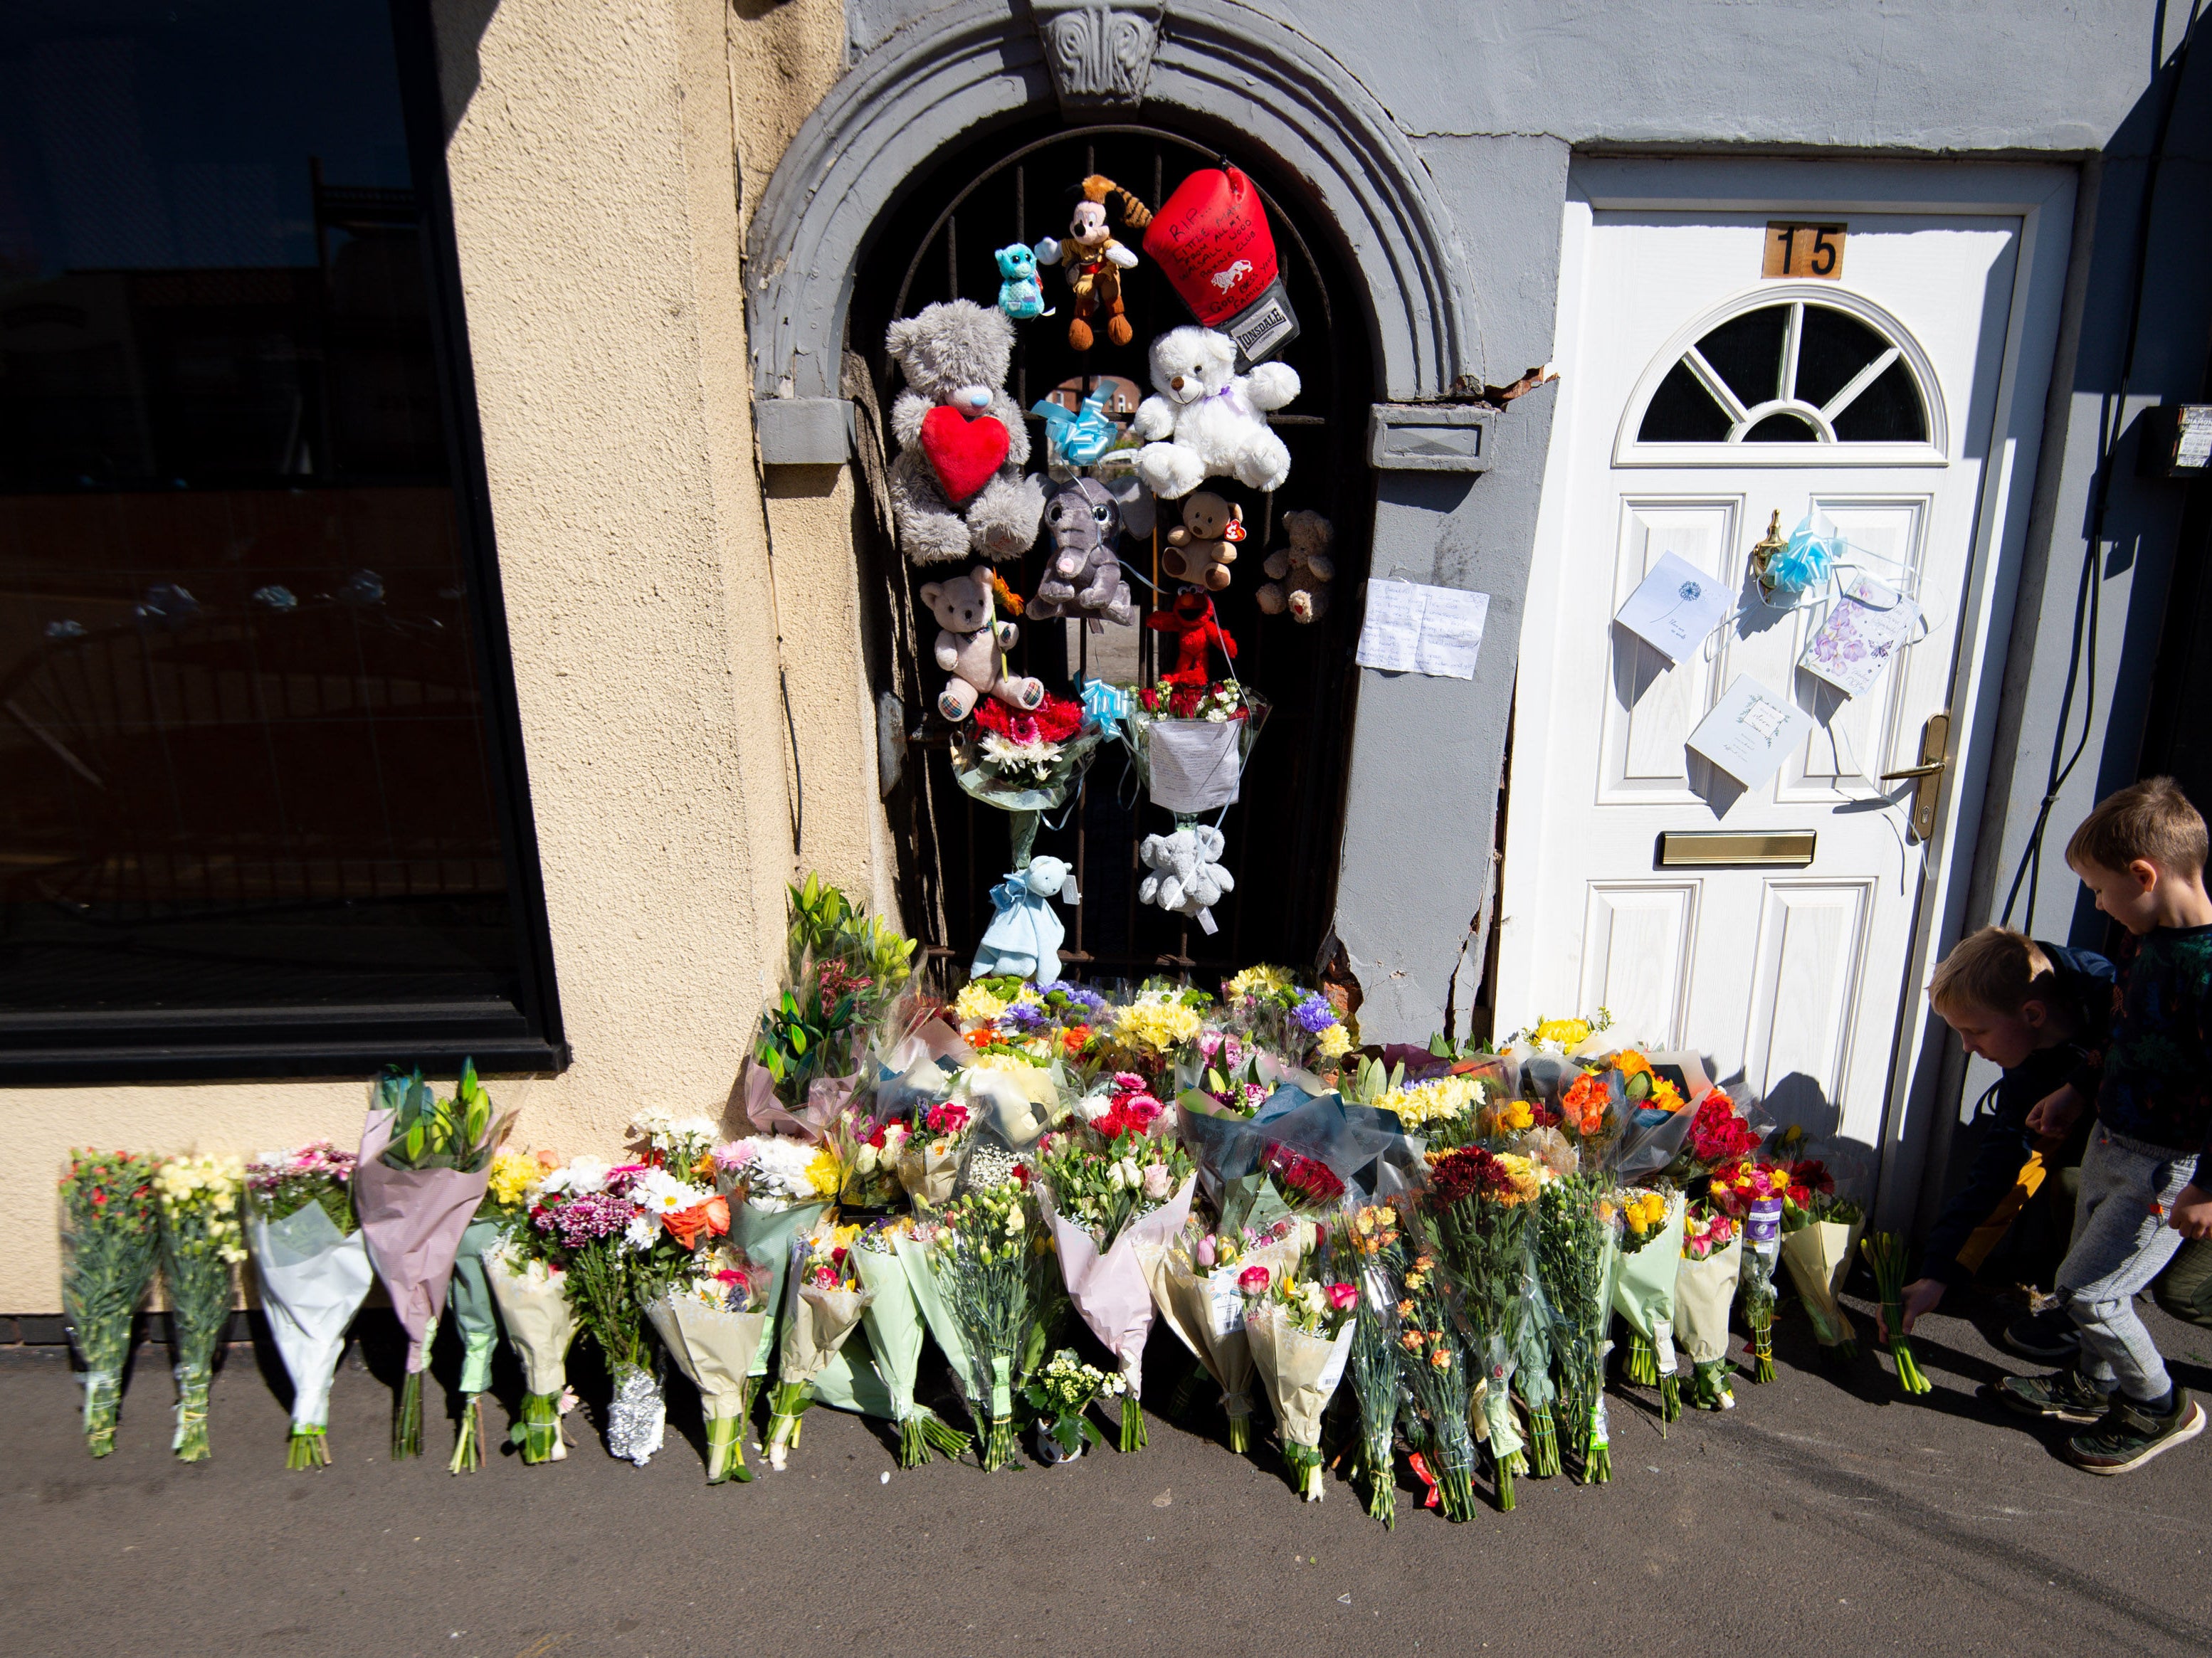 Flowers have been left at the scene to pay tribute to Ciaran and pay respects to his family.